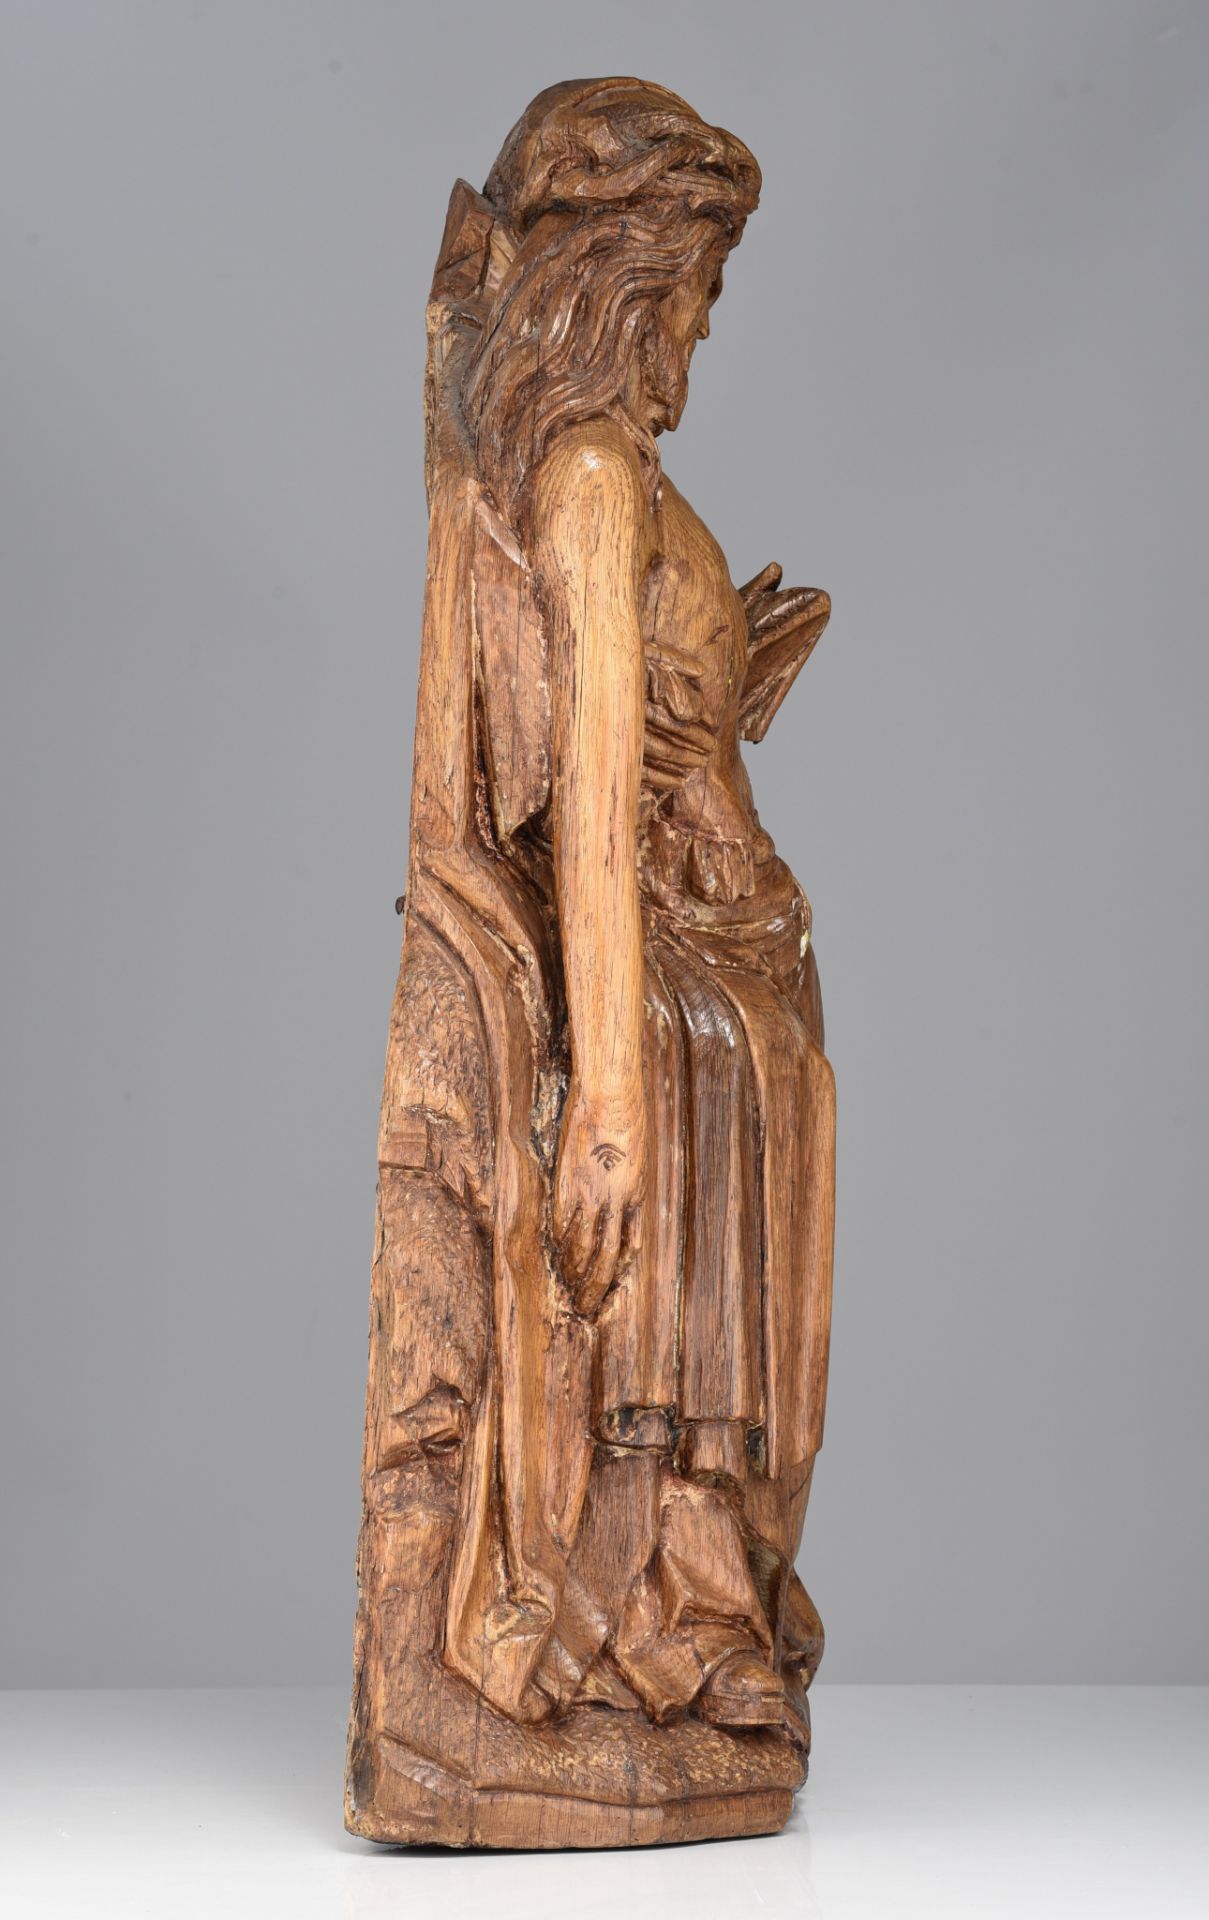 A 16thC oak sculpture of the Pieta, probably the Southern Netherlands, H 97 cm - Image 5 of 6